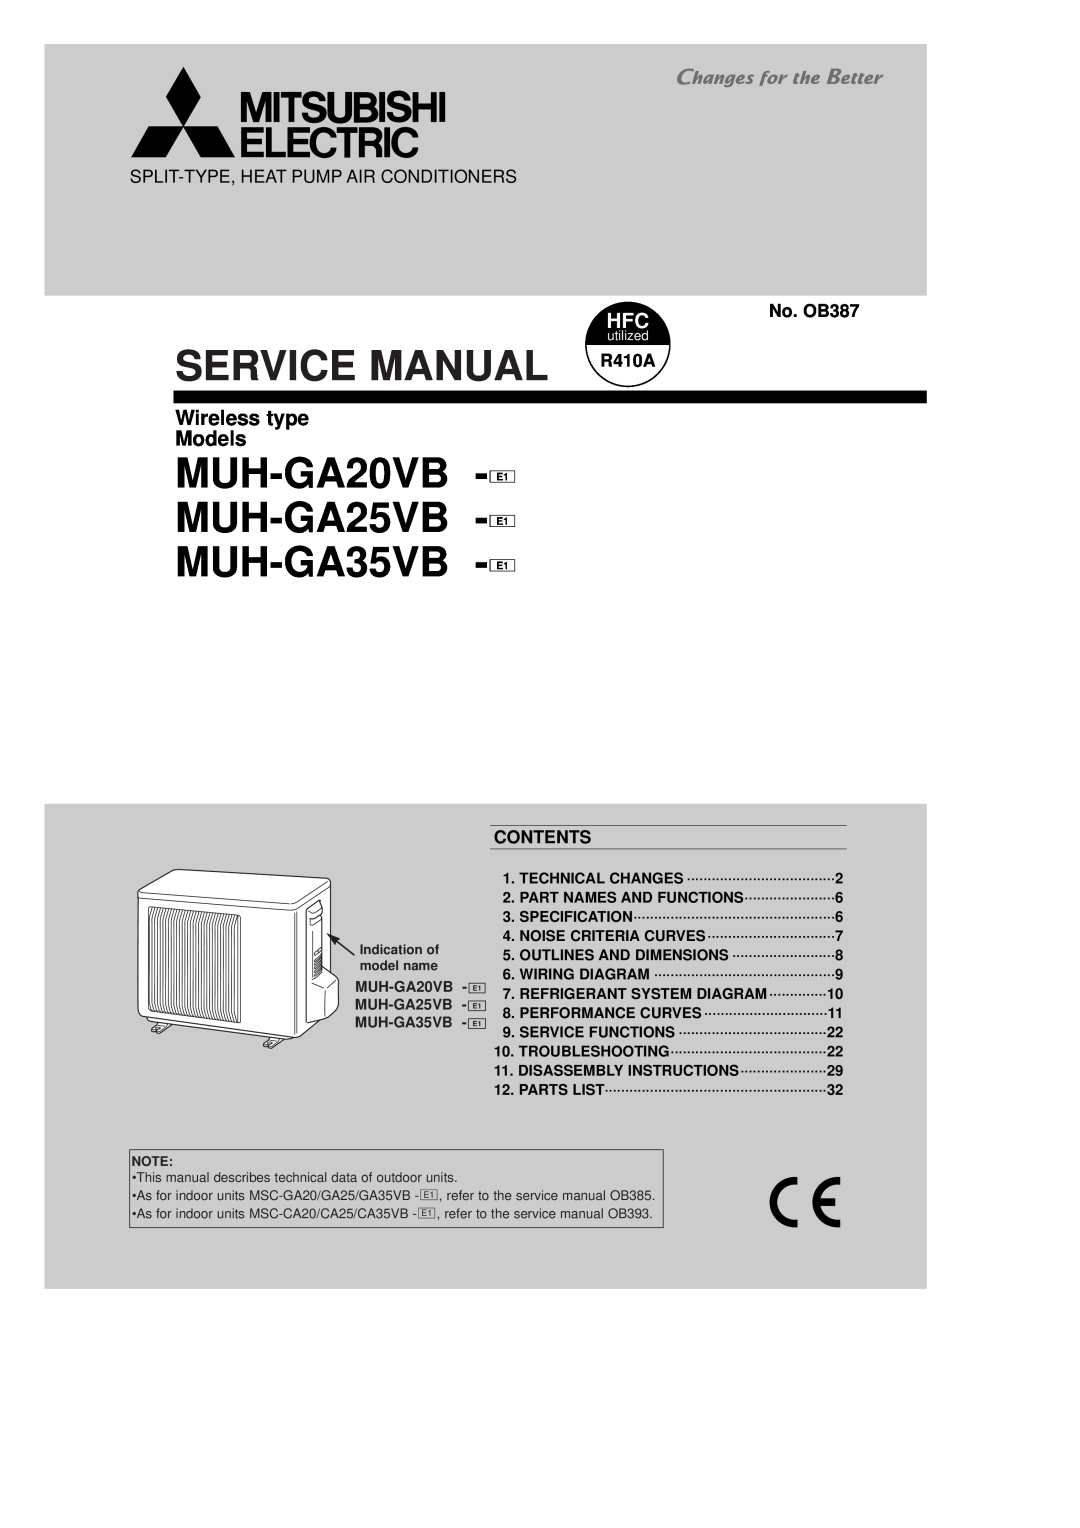 Pioneer MUH-GA25VB service manual Split-Type,Heat Pump Air Conditioners, No. OB387, Contents, Wireless type Models 